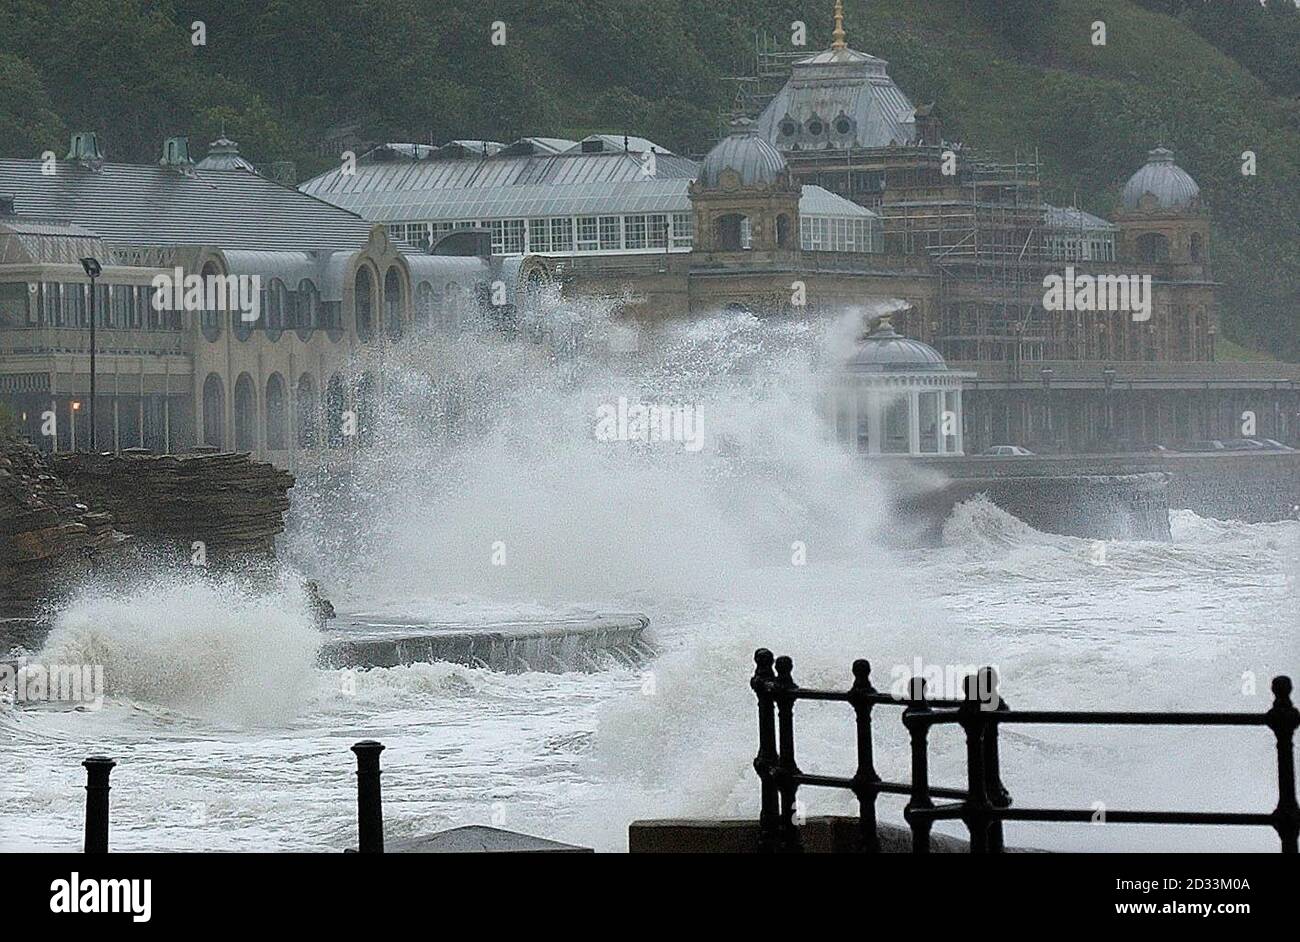 Gale force winds, high tides and torrential rain pound the Spa Theatre, at Scarborough. As the UK recovers from some of the worst summer storms on record, thousands of homes were still without electricity. Stock Photo